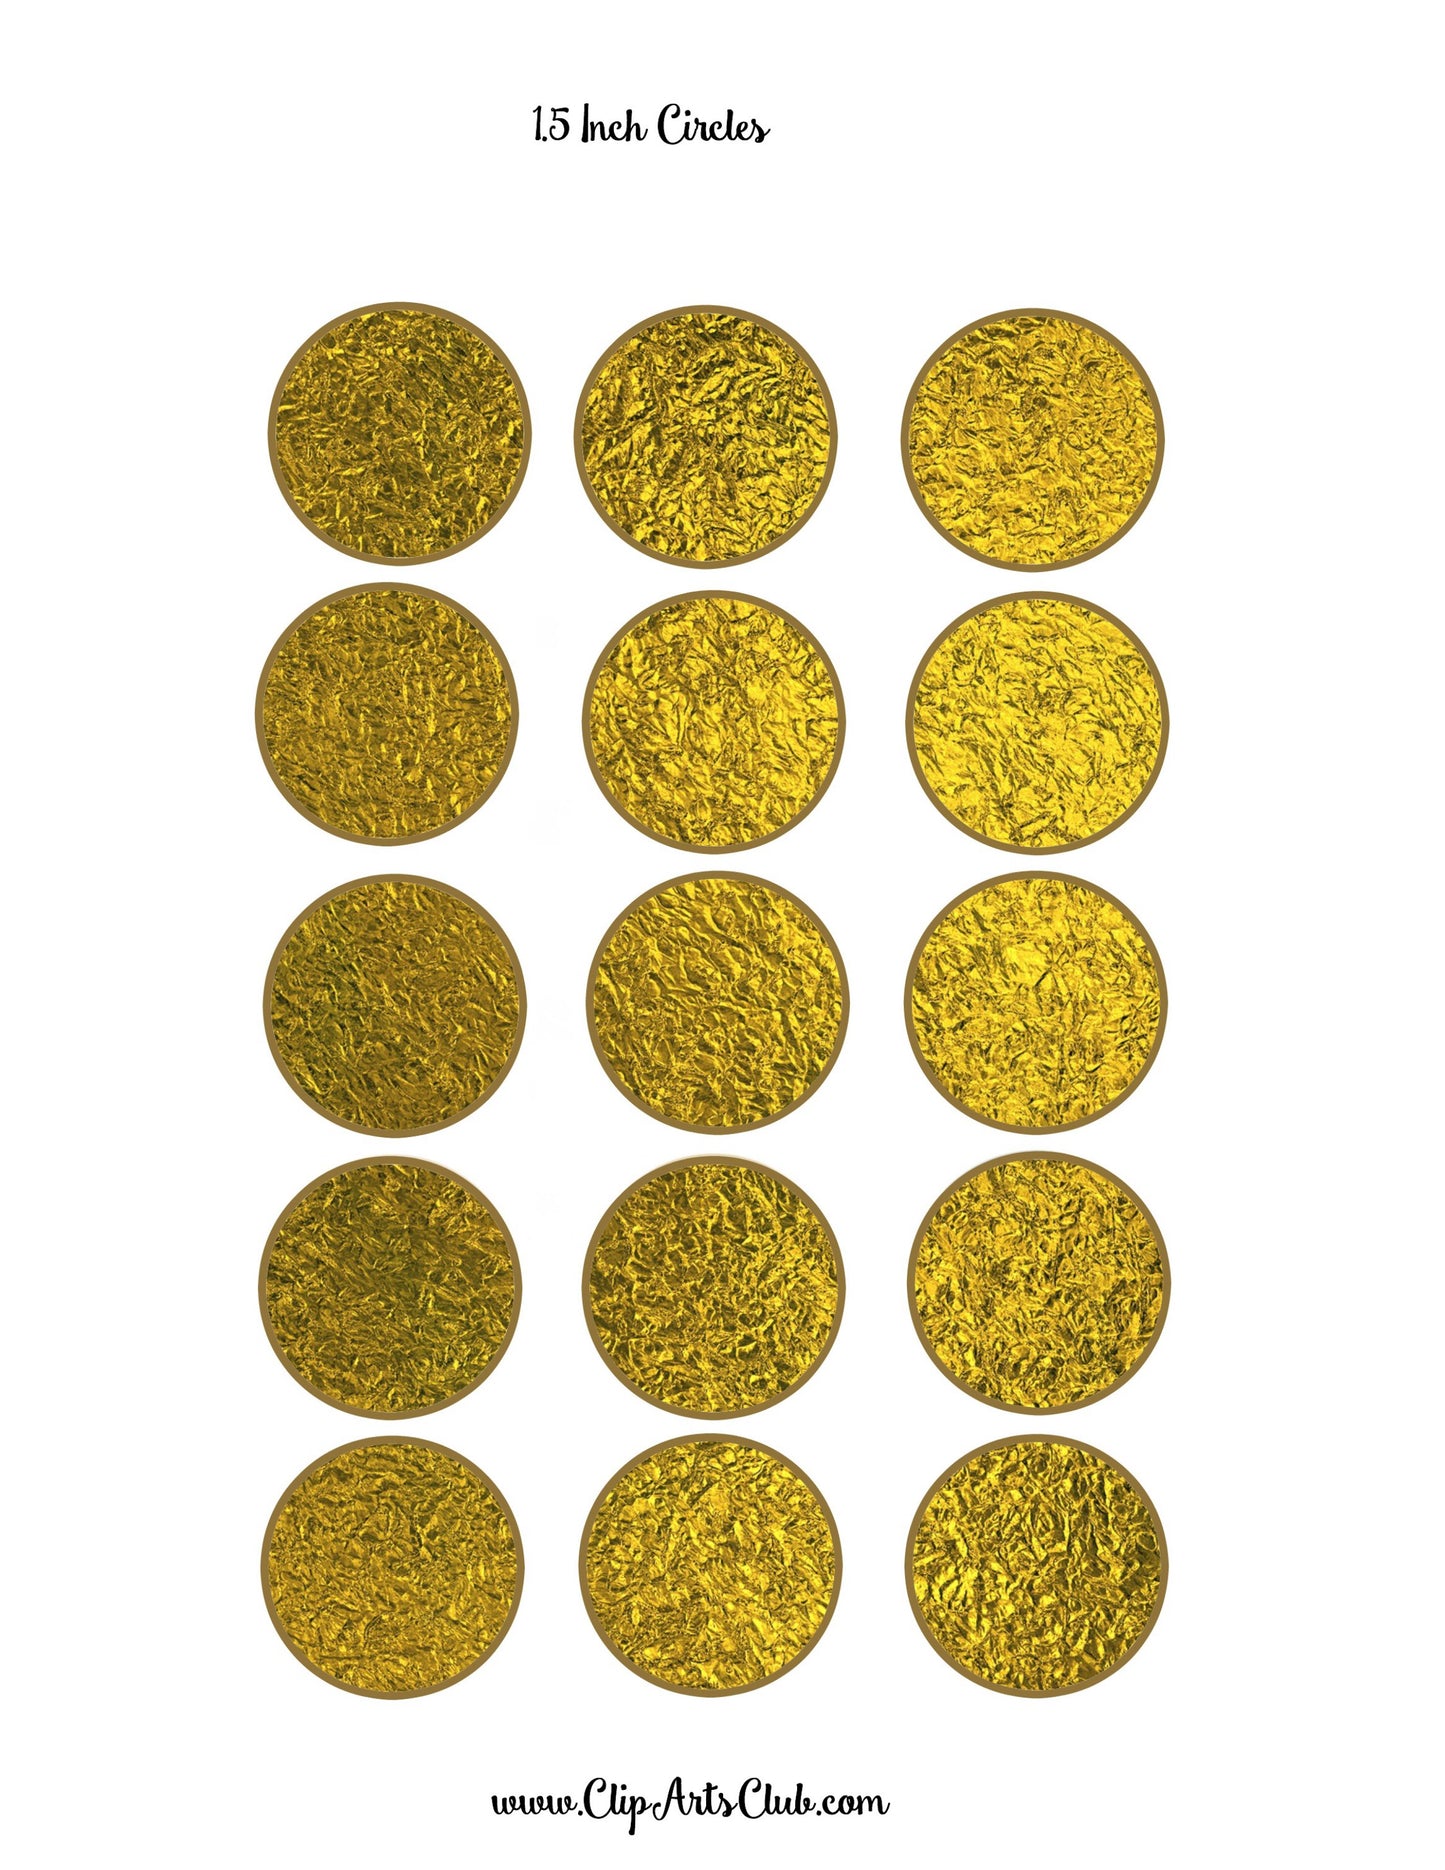 Gold Crackle Foil Collage Sheet for Stickers, labels, Tags, Party Decoration